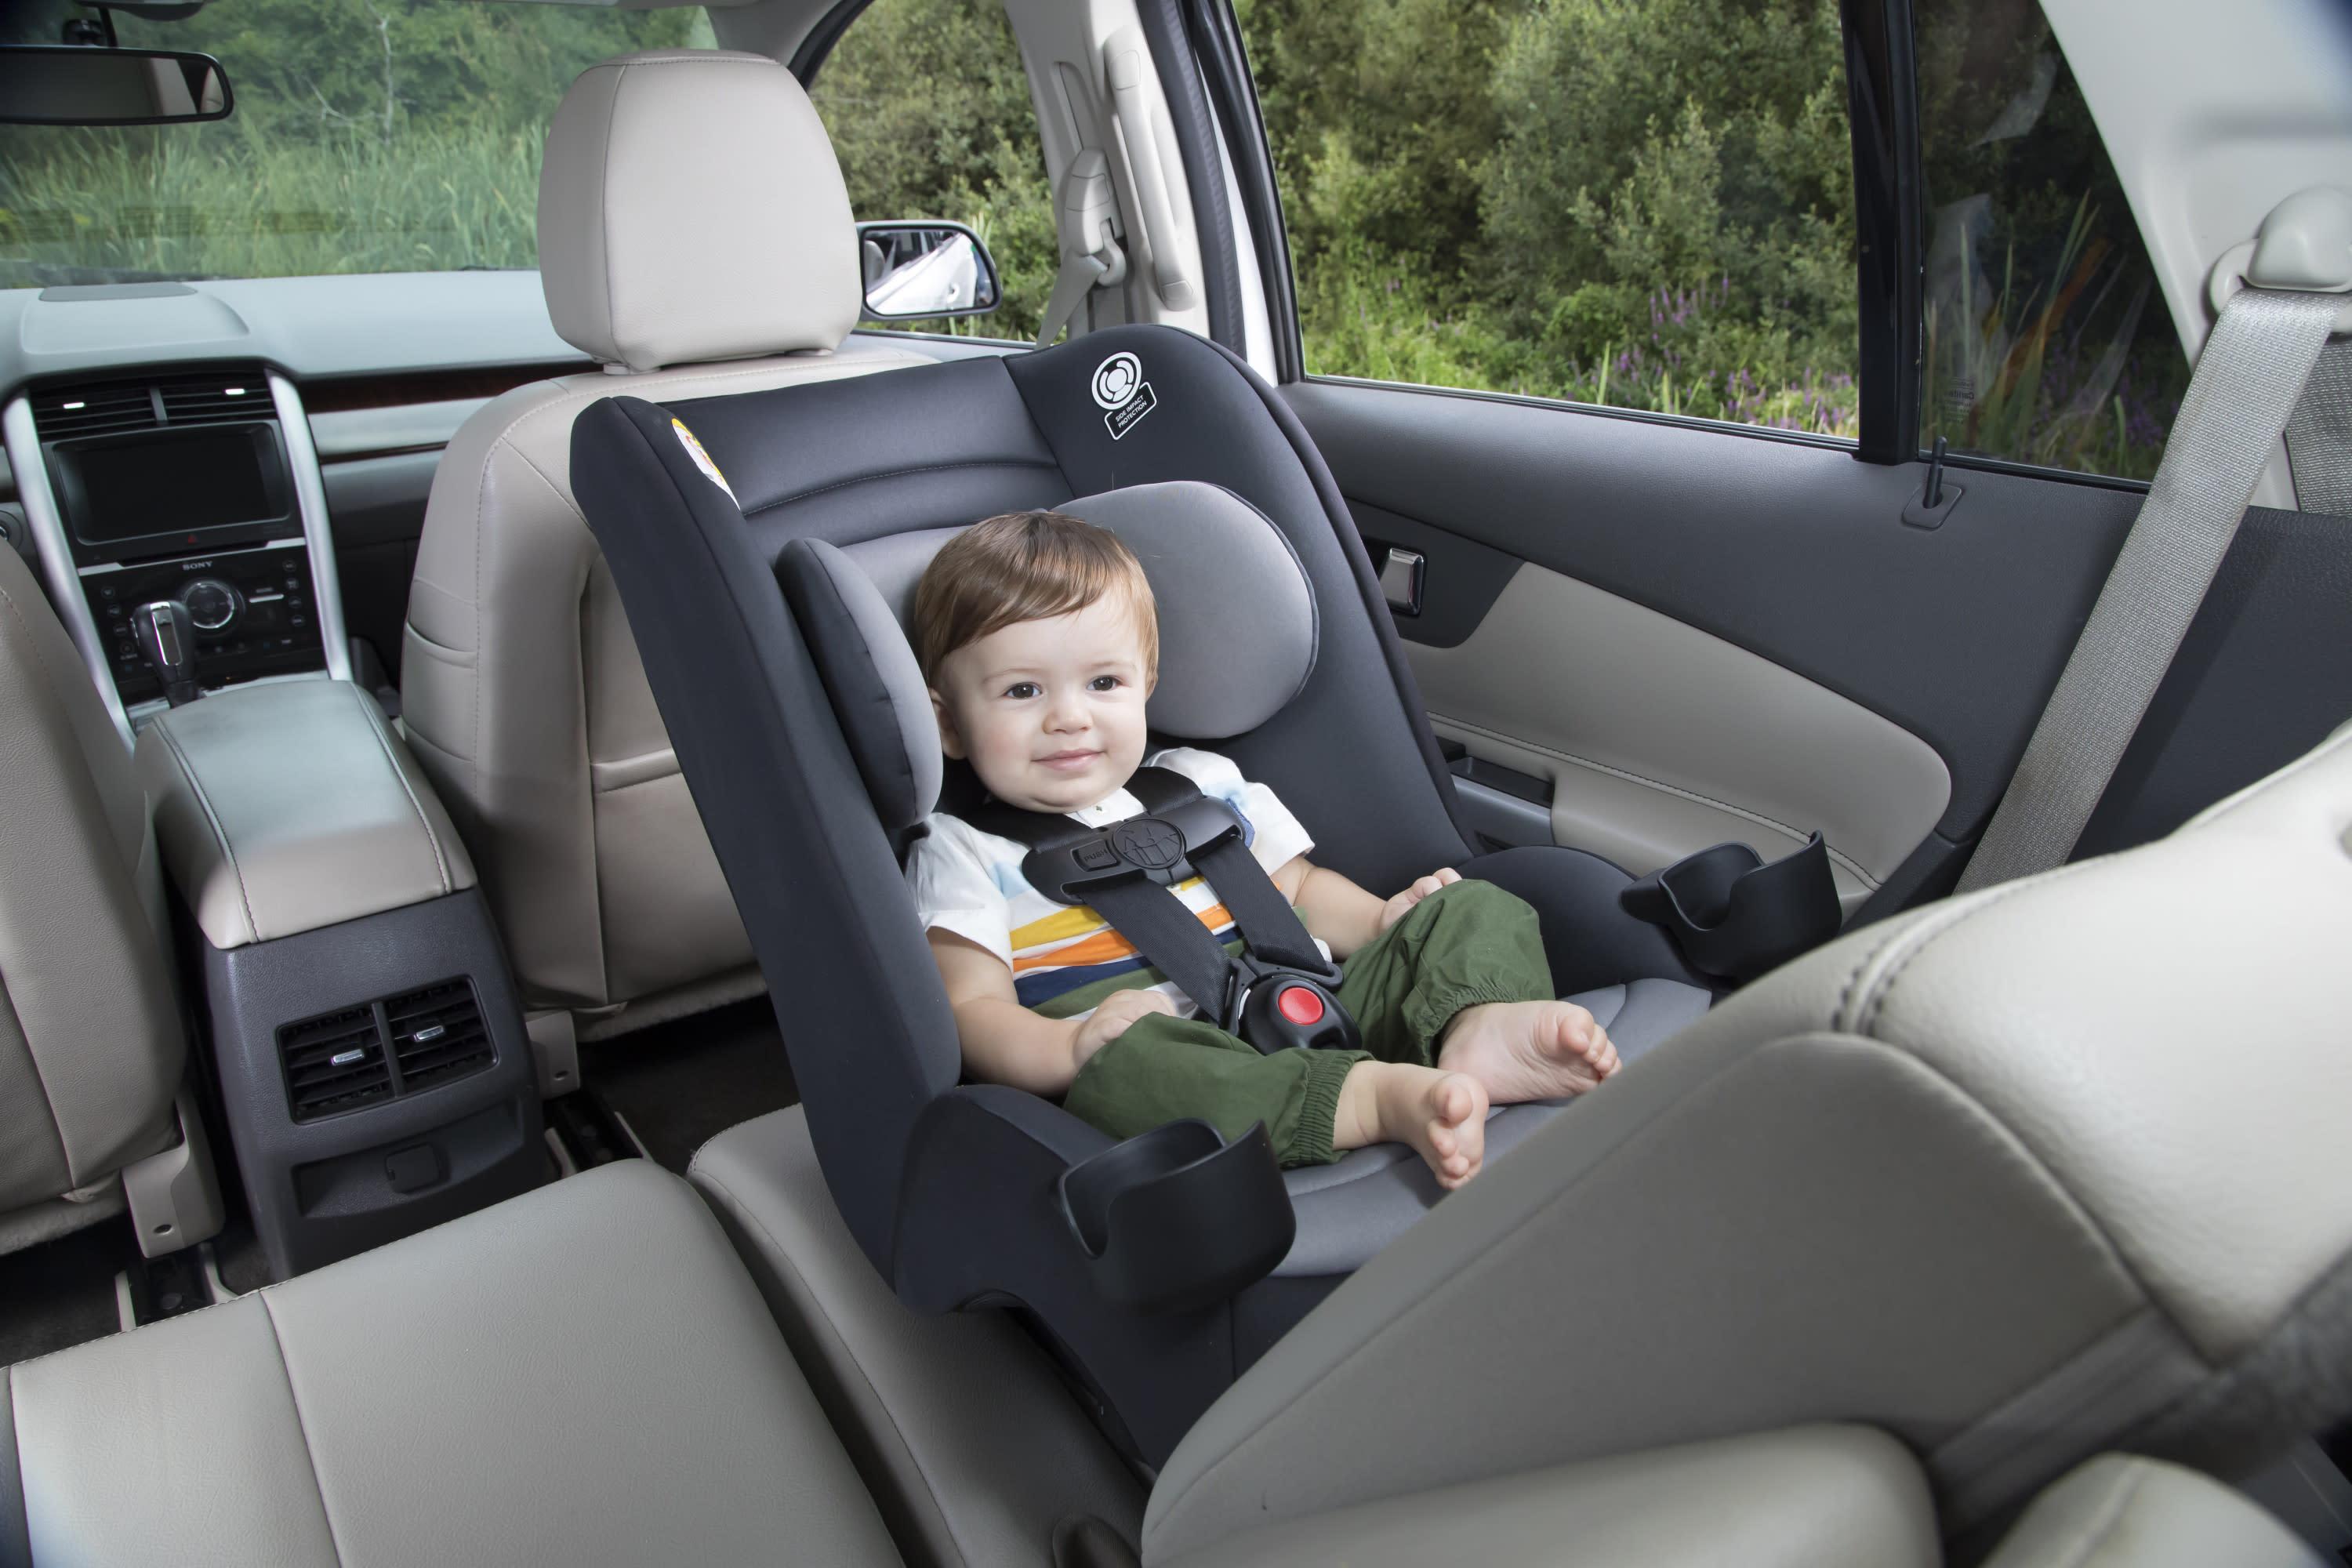 Cosco Kids MightyFit LX Convertible Car Seat, Broadway - image 5 of 11